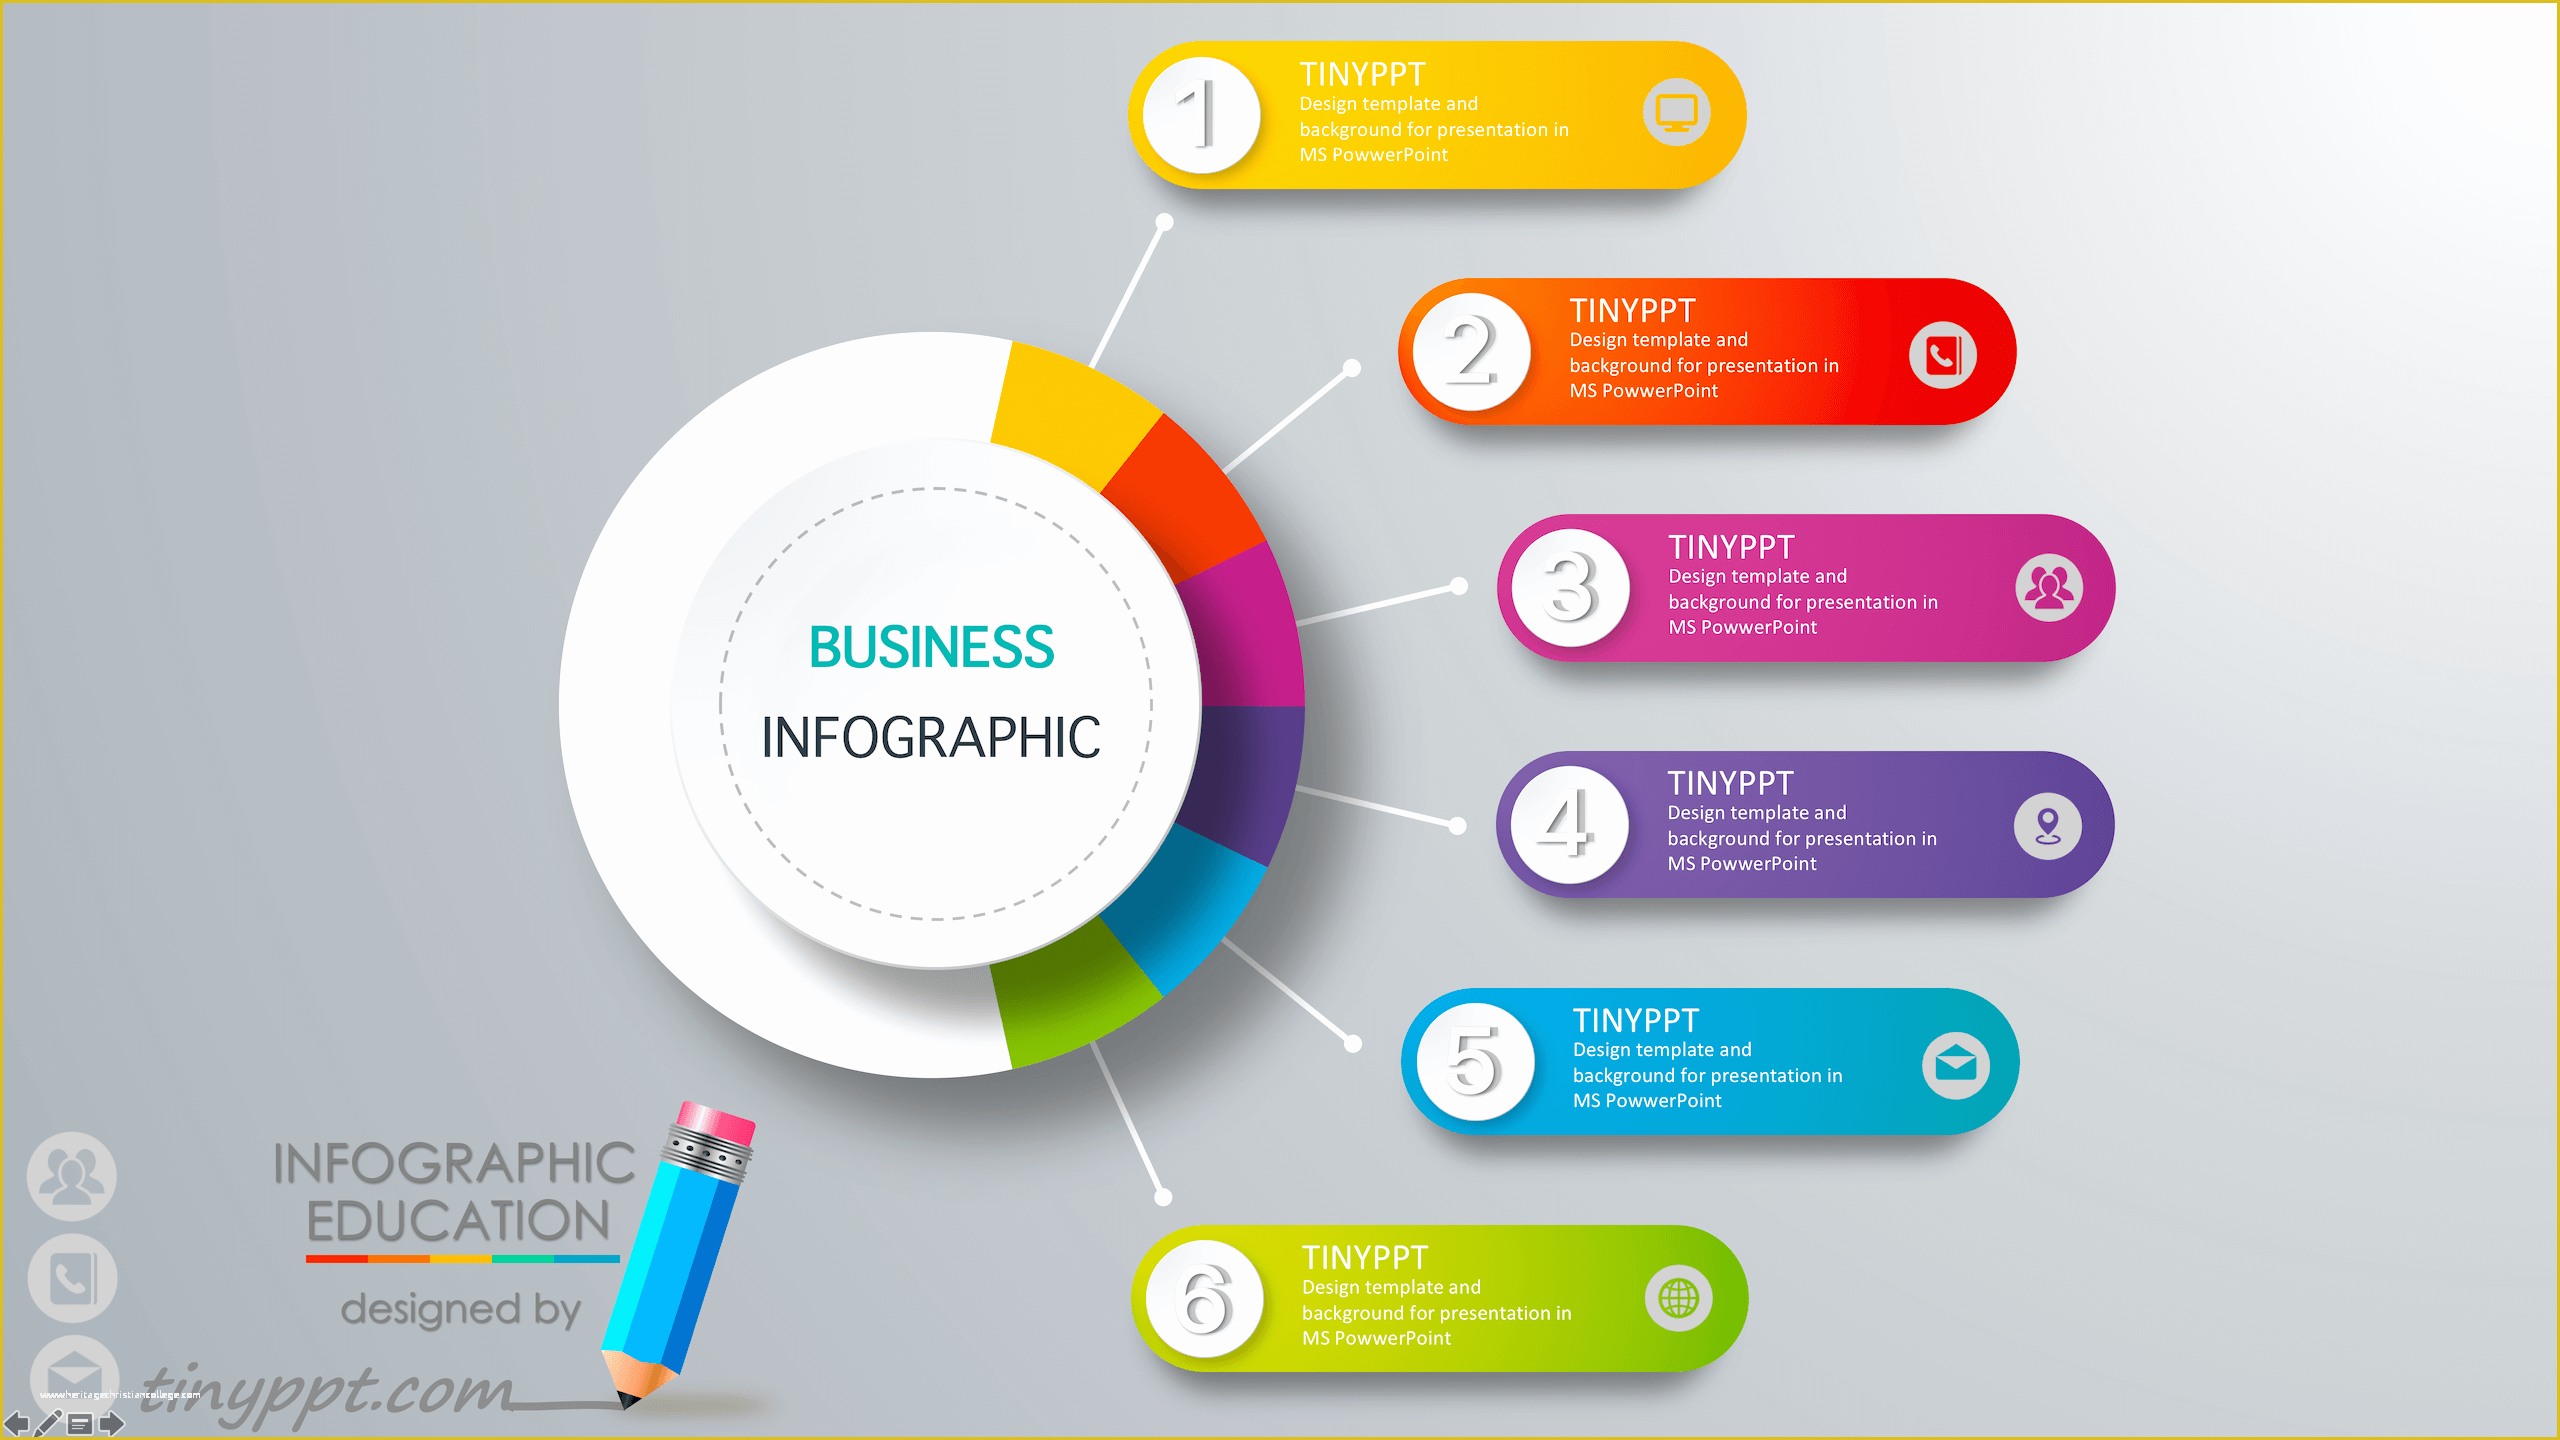 Ms Office Powerpoint Templates Free Download Of Powerpoint Infographic Icons Powerpoint Timeline Templates